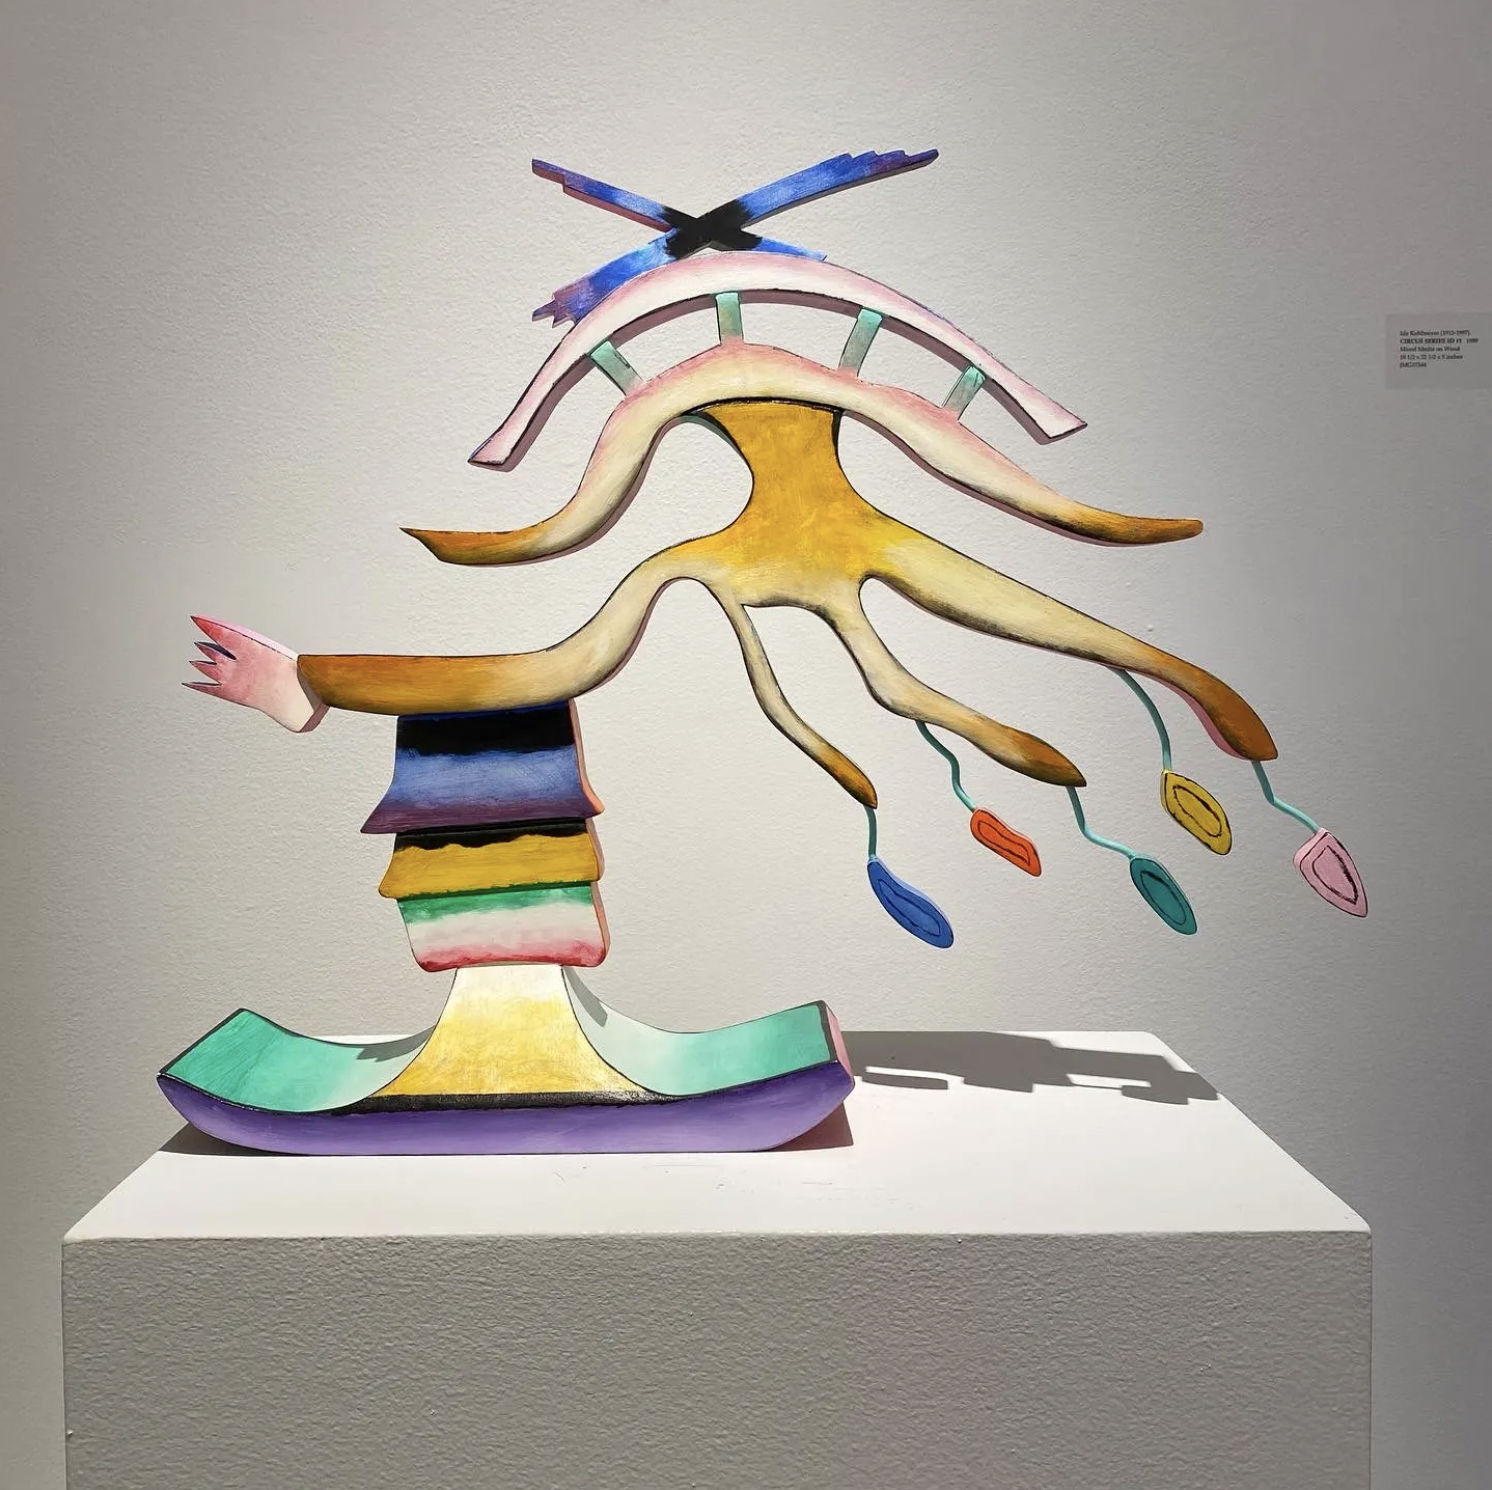 Ida Kohlmeyer, Circus Series 3D #1, 1989, mixed media on wood, 18 1/2 x 22 1/2 x 5 in. Courtesy of Jerald Melberg Gallery.